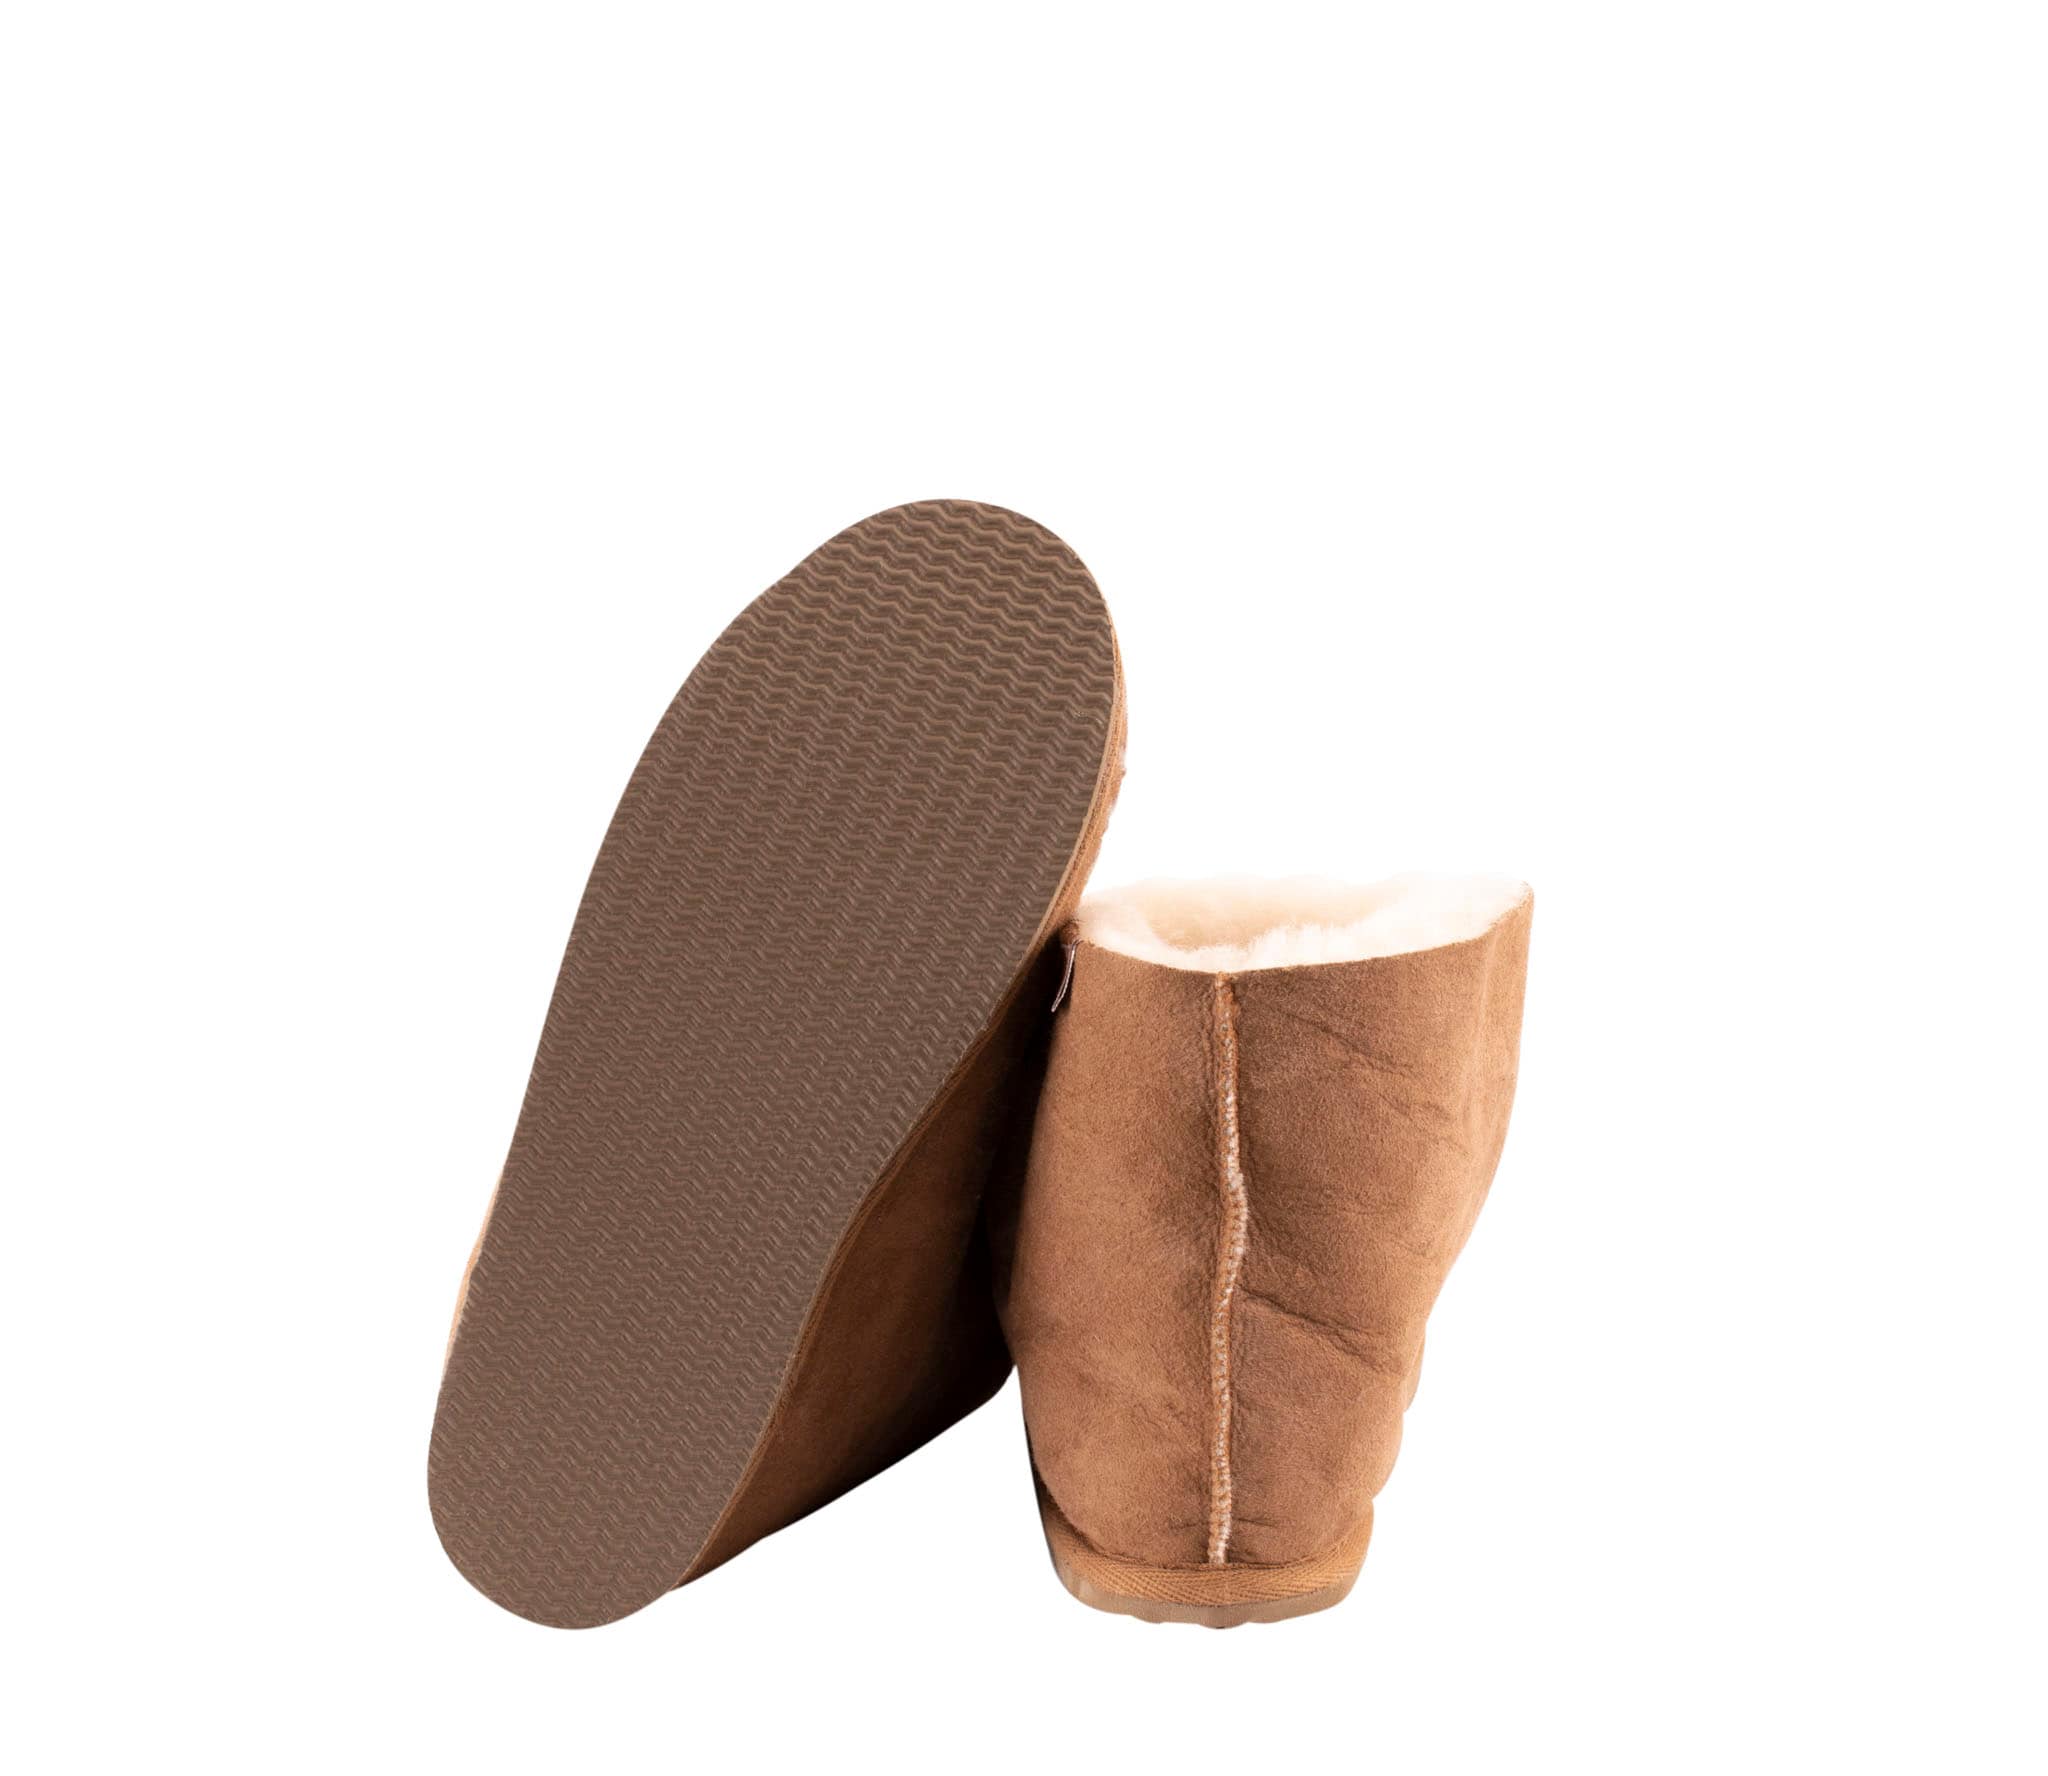 Shepherd Pia are a pair of soft pliable sheepskin slippers which are a slightly higher ankel model.